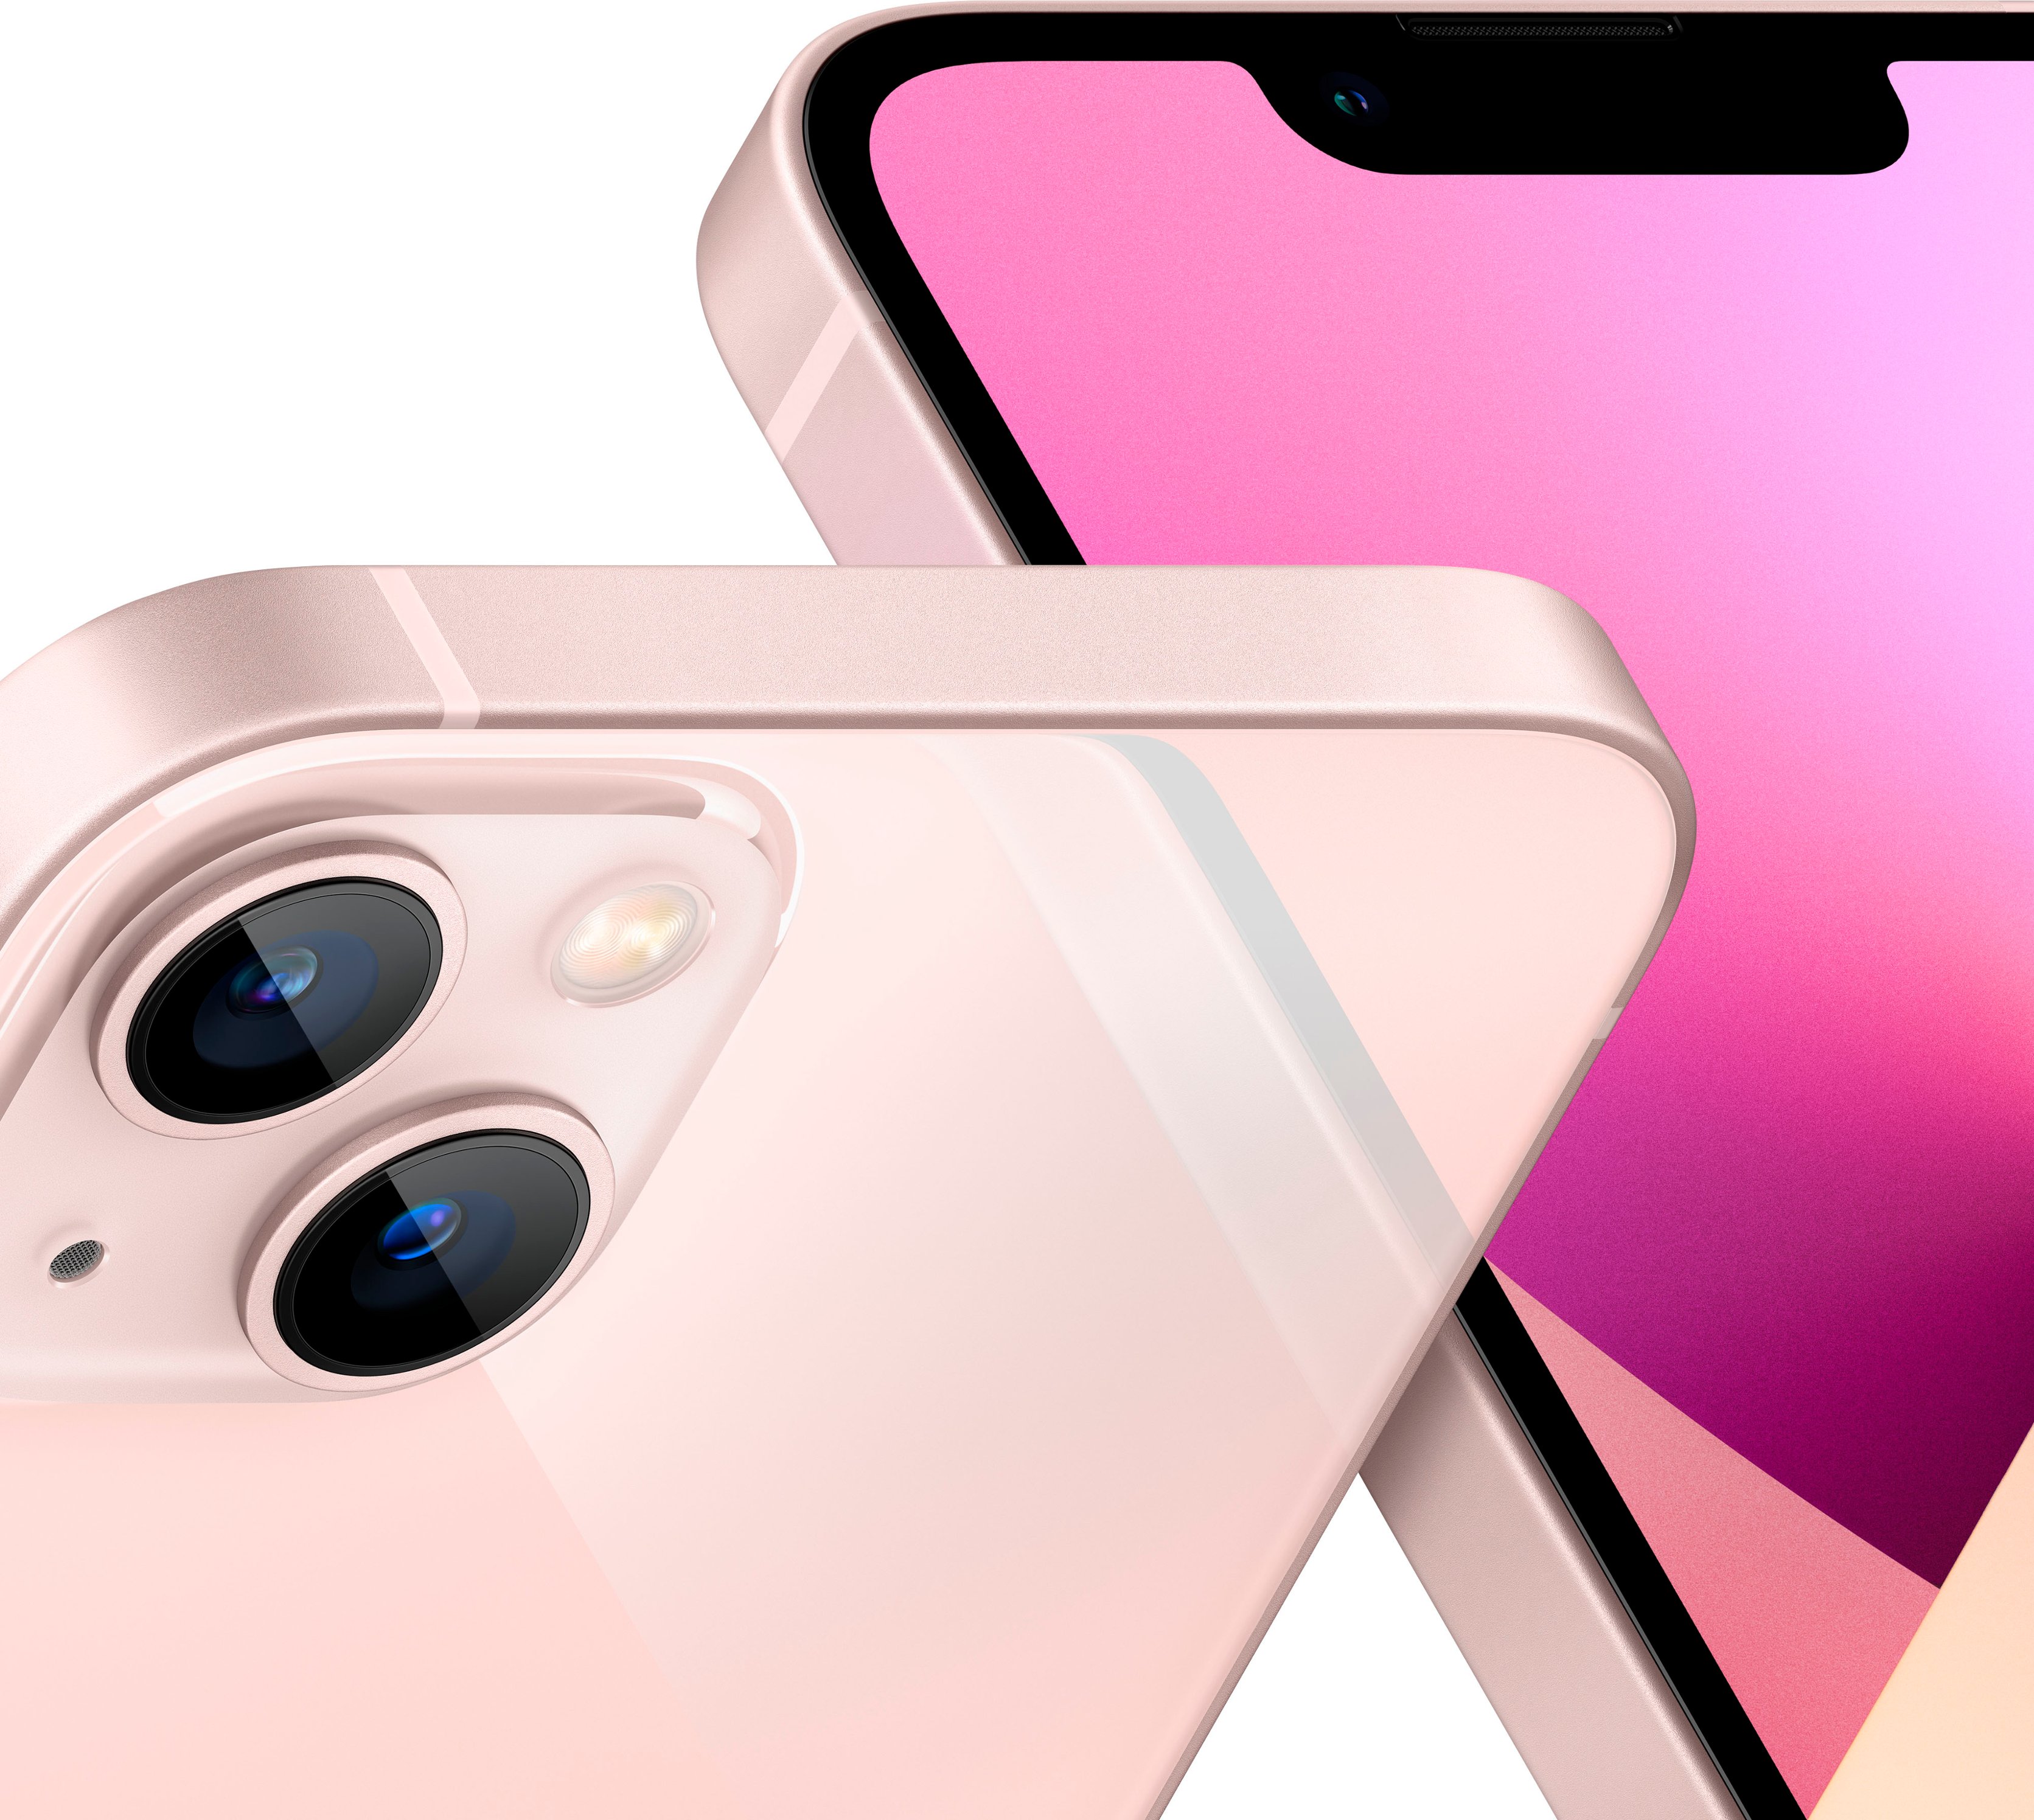 Best Buy: Apple iPhone 13 mini 5G 128GB Pink (AT&T) MLHP3LL/A